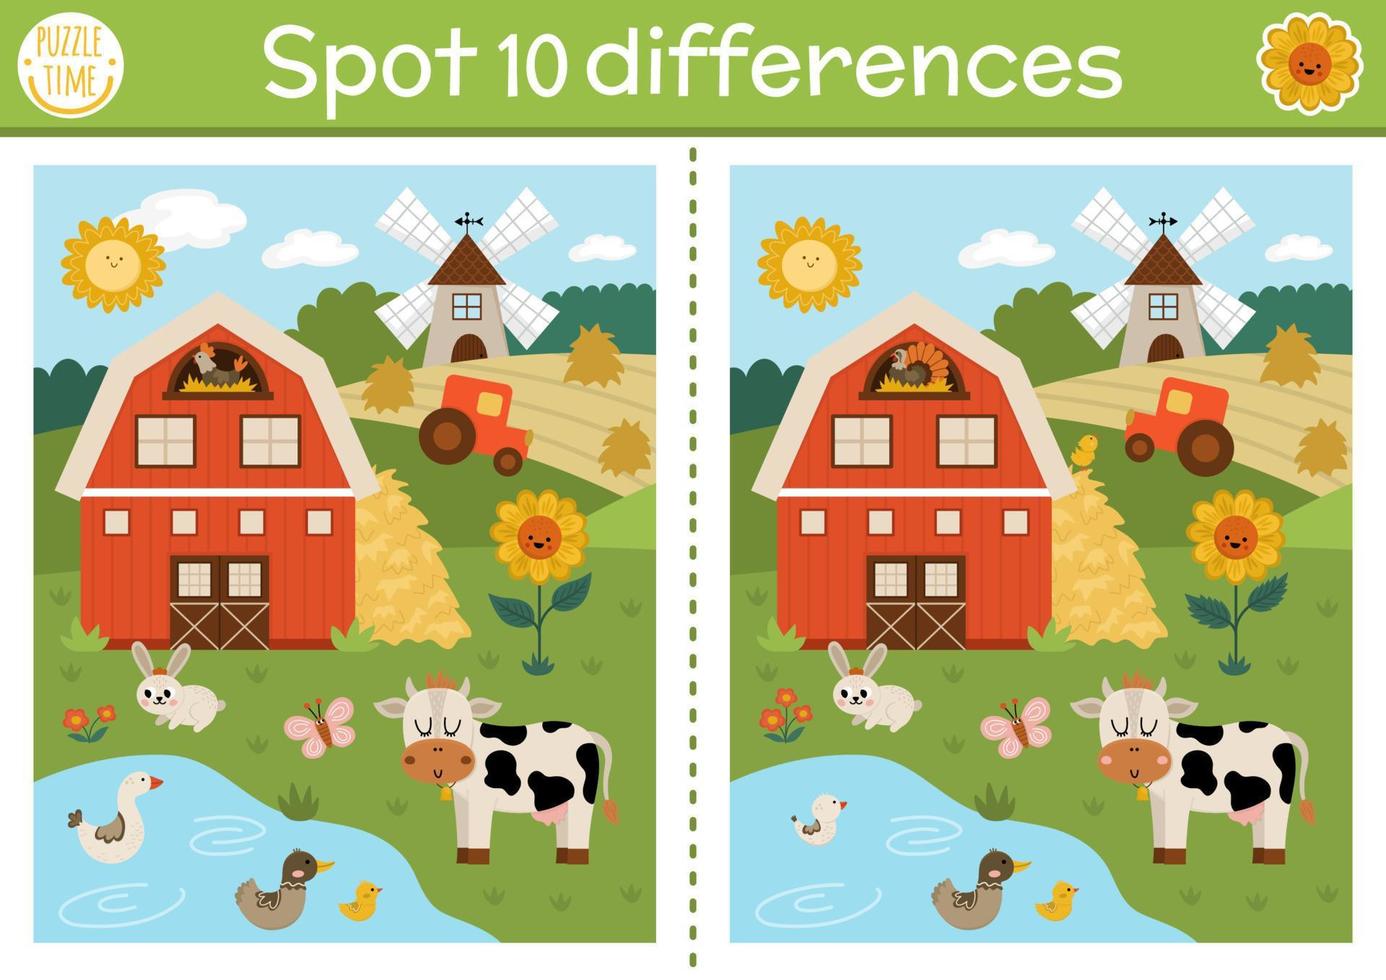 Find differences game for children. On the farm educational activity with cute barn house, rural landscape, tractor. Farm puzzle for kids with farm scene. Village printable worksheet vector